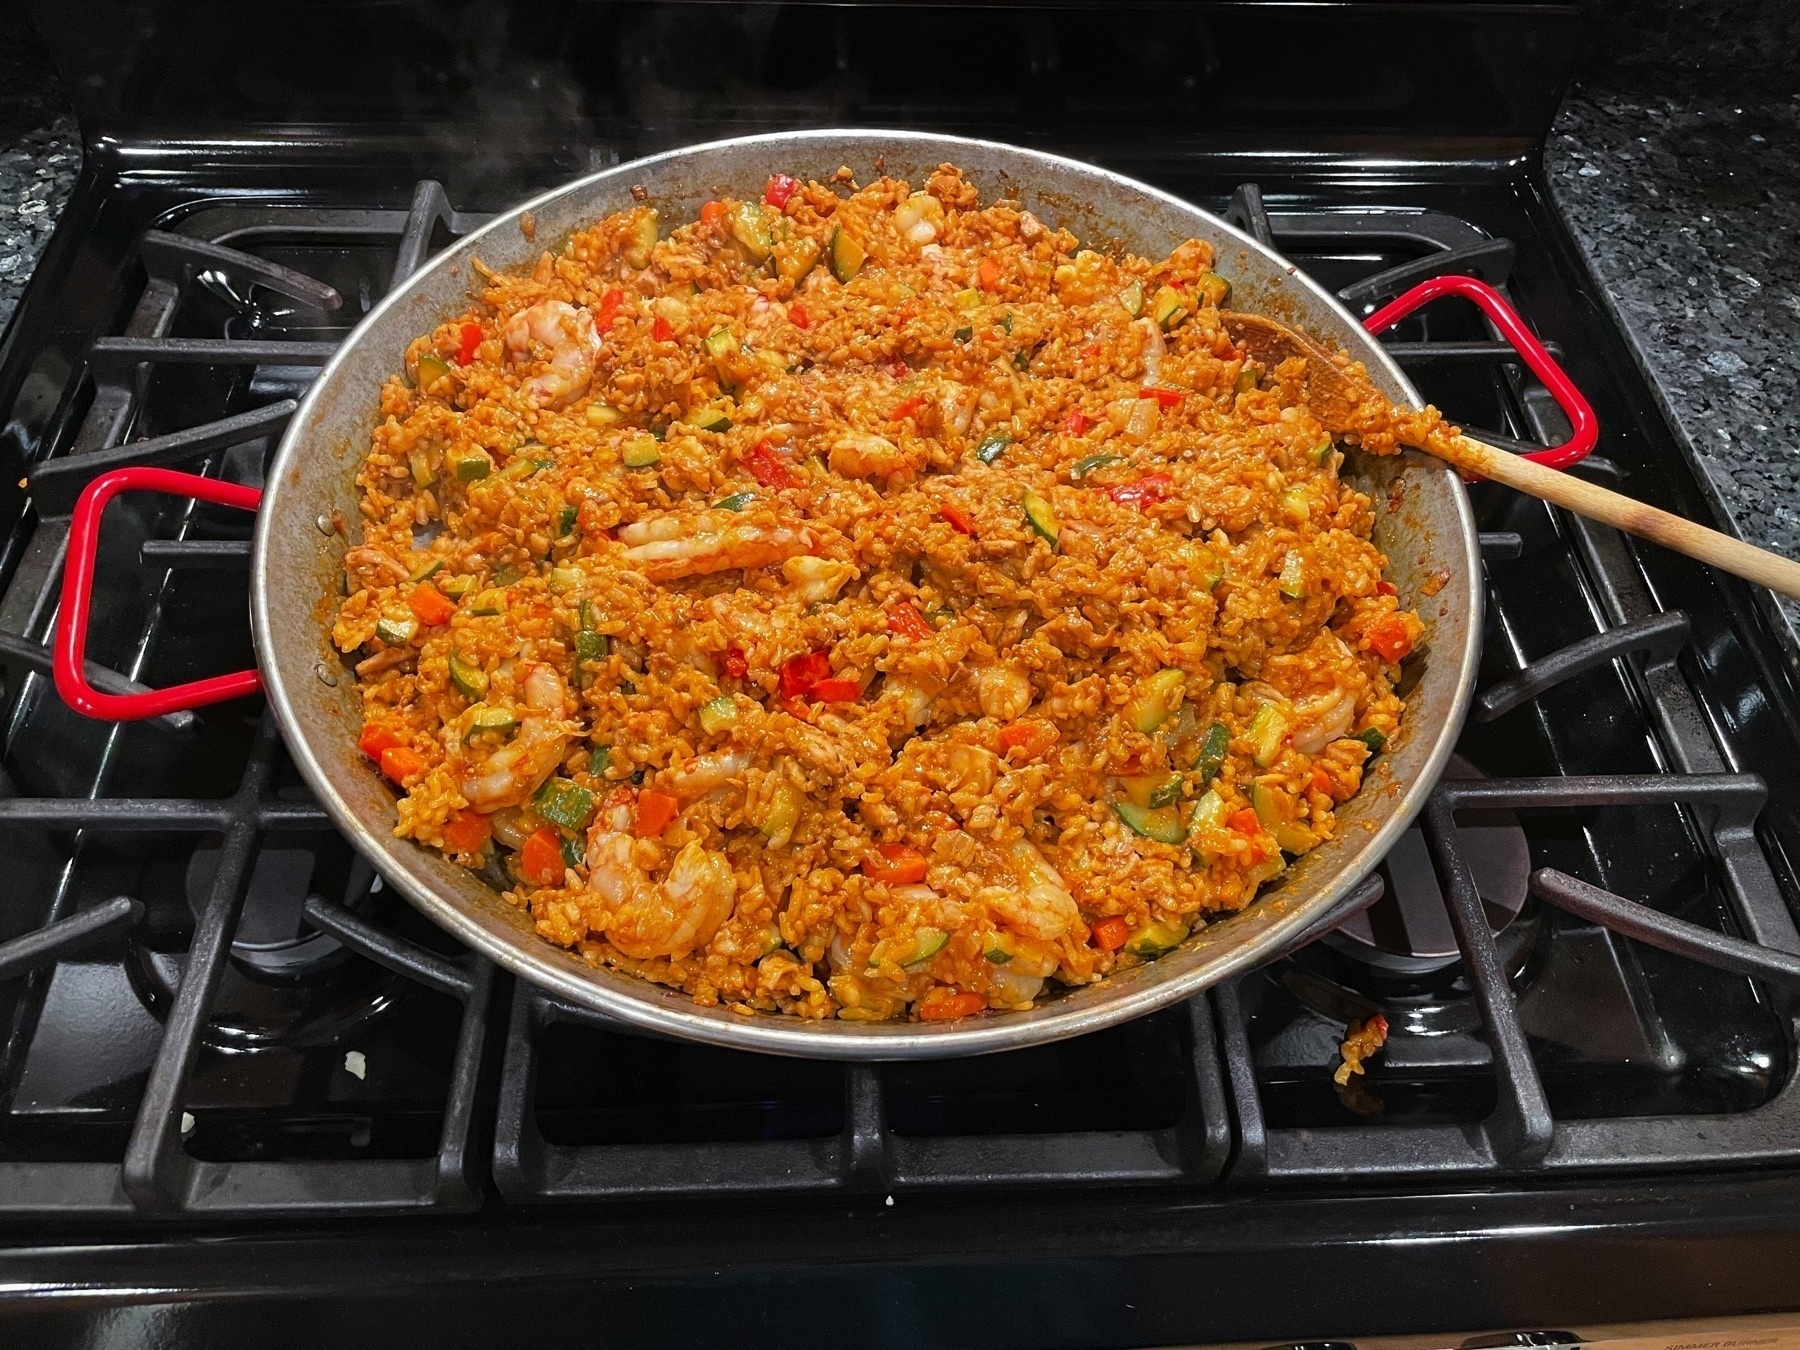 Fully cooked paella in paella pan.